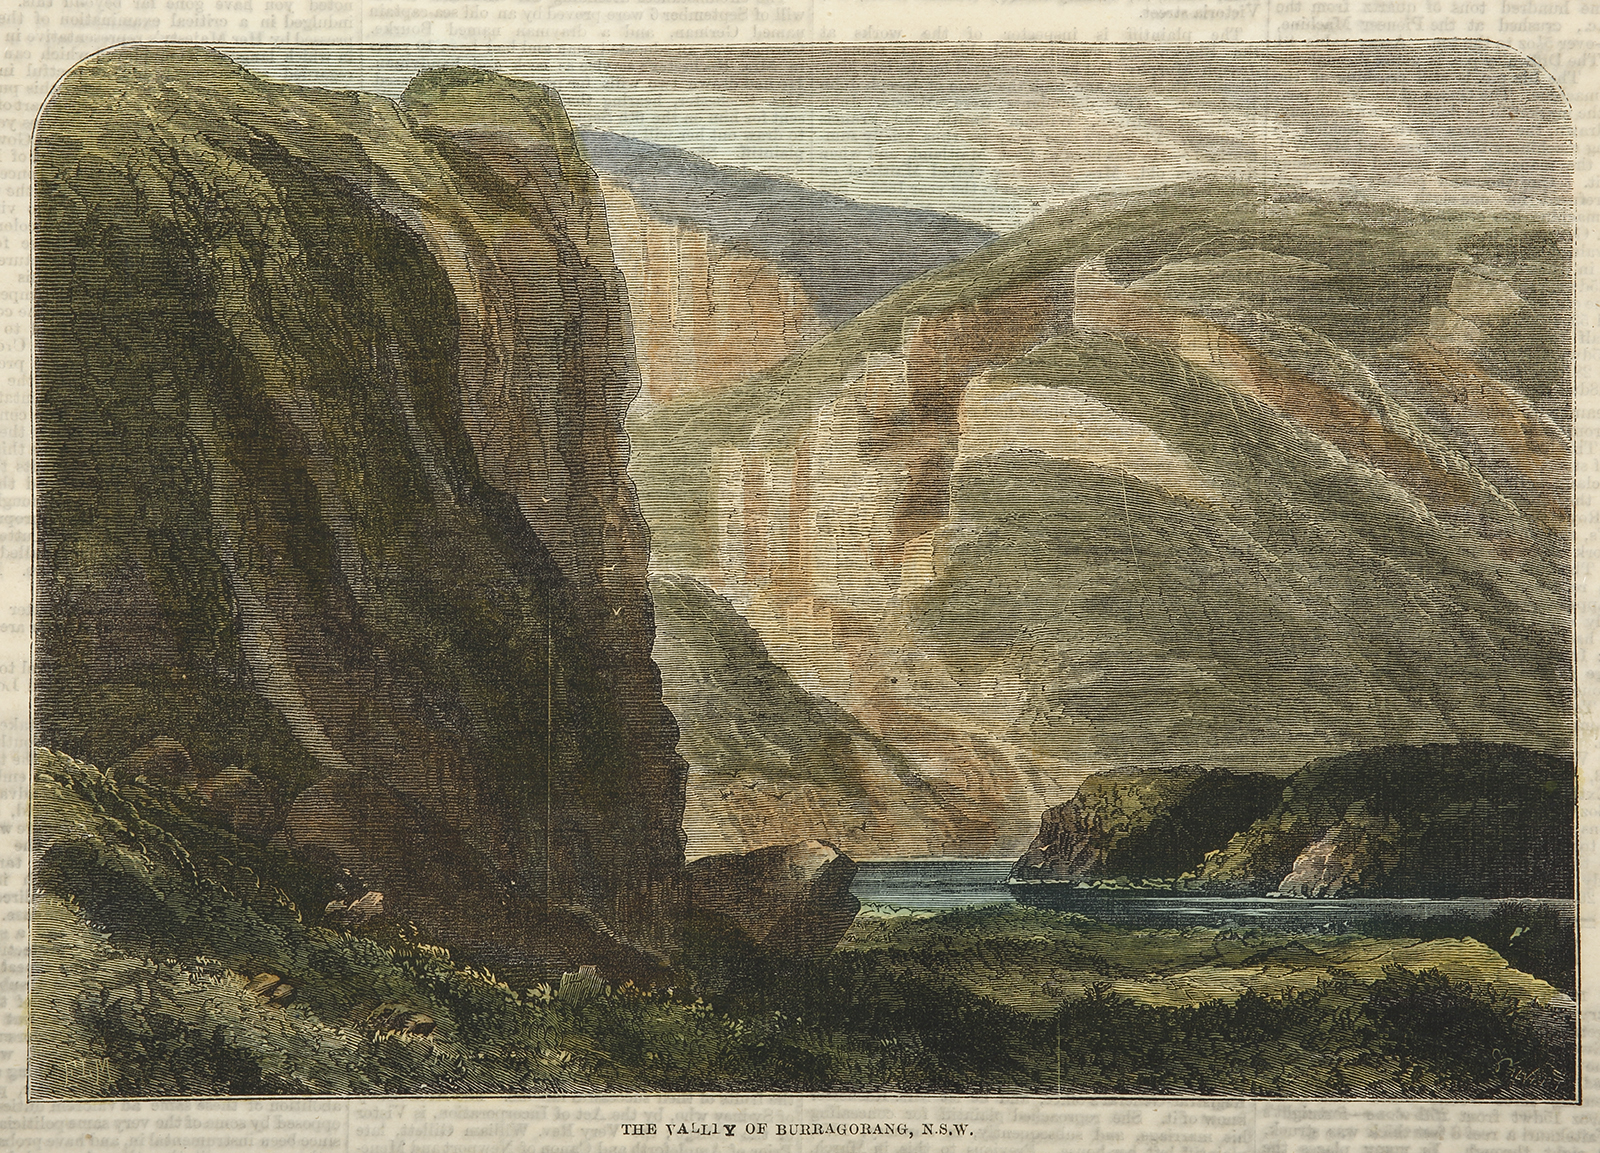 The Valley of Burragorang, N.S.W. - Antique View from 1877